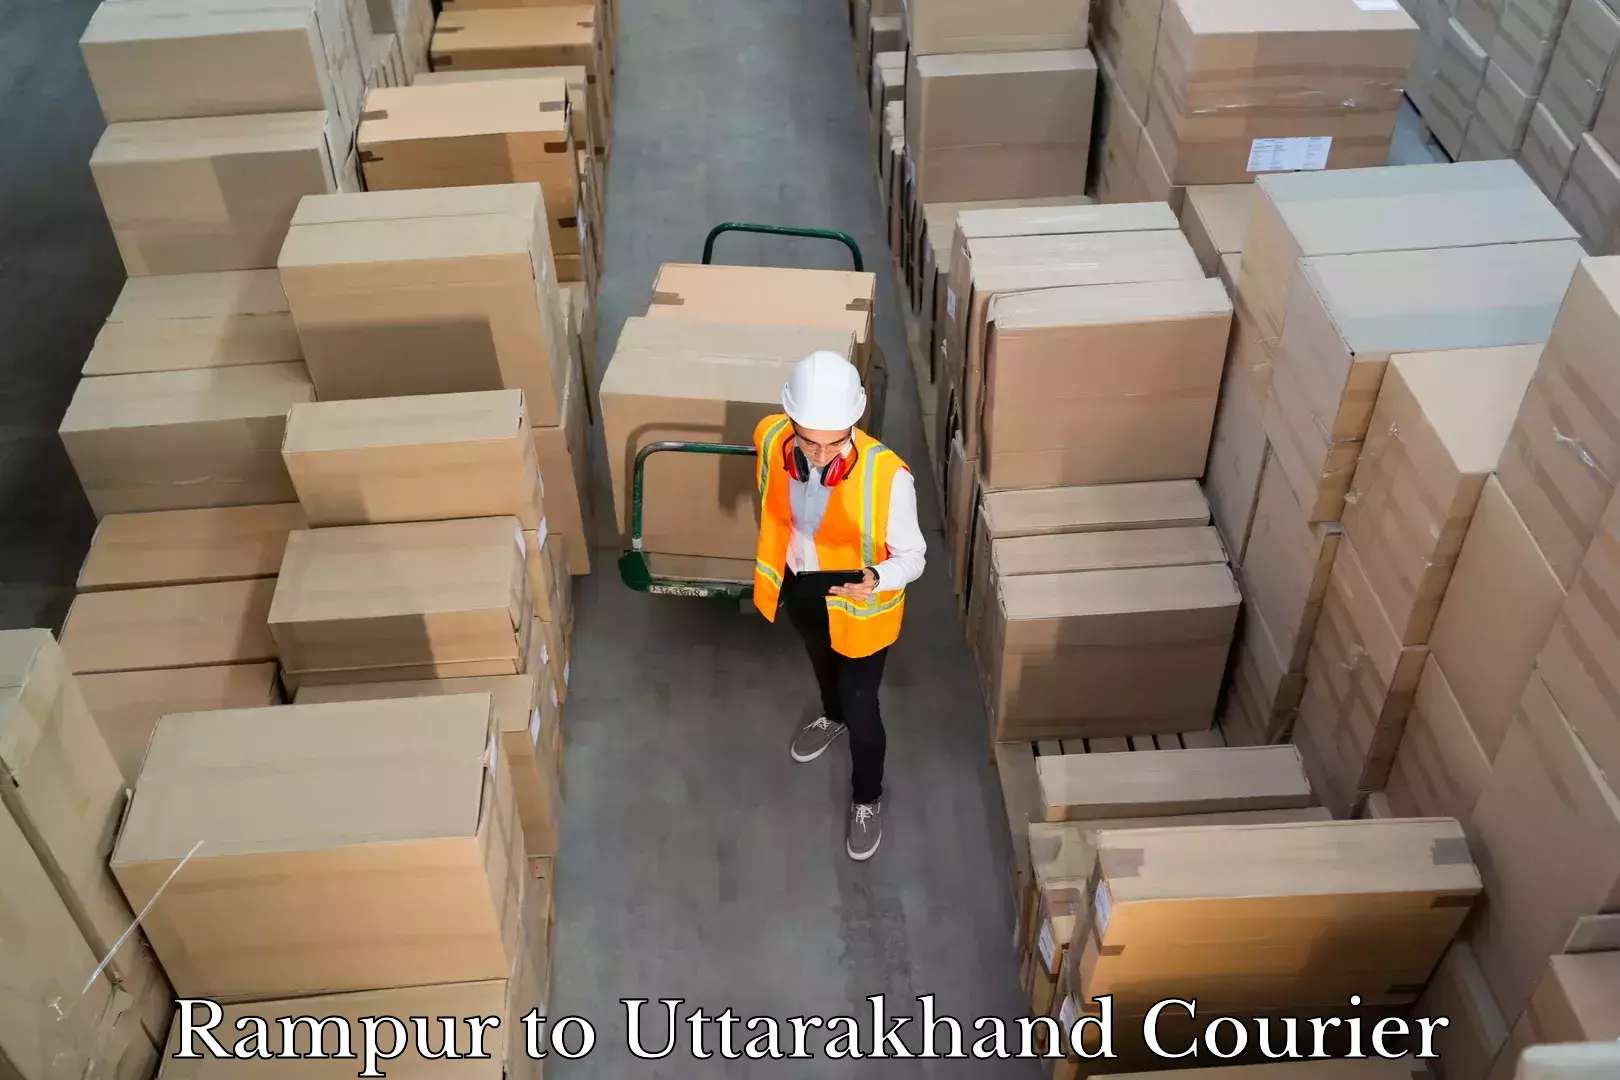 Luggage delivery providers Rampur to Uttarakhand